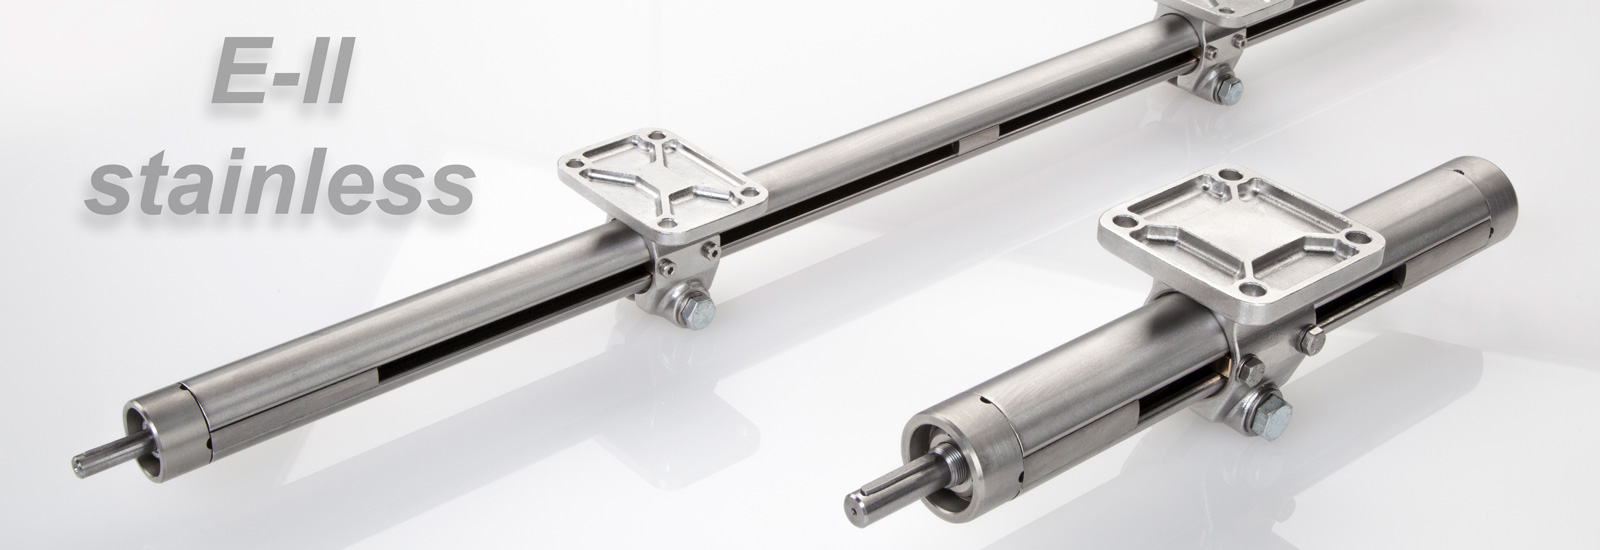 E-II stainless steel - corrosion-resistant linear actuator